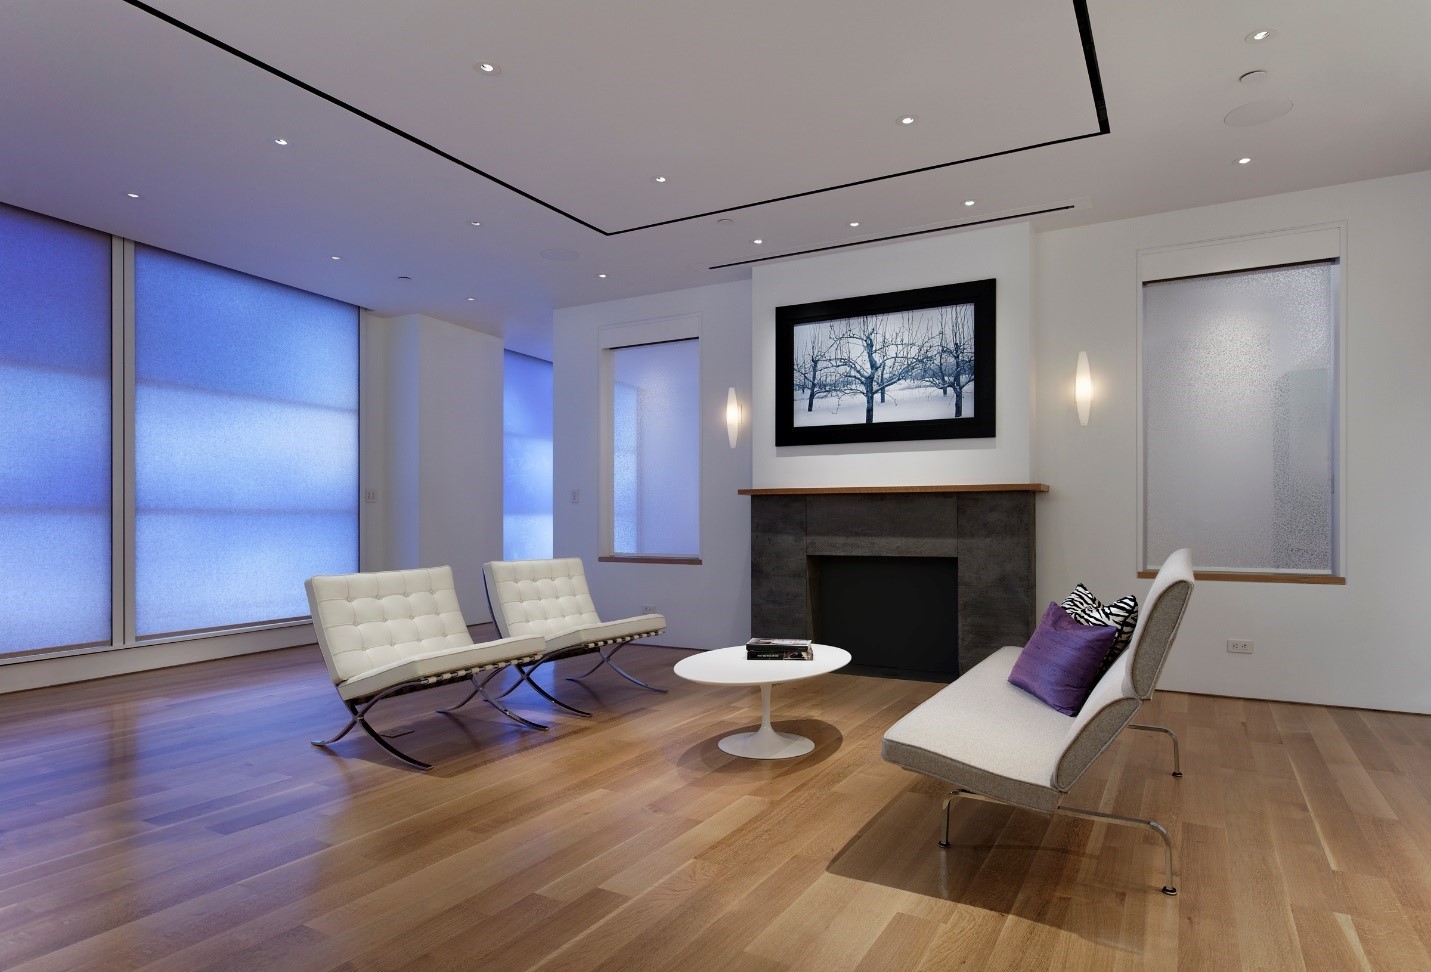 3 Reasons Why Home Lighting Control Is a Bright Idea